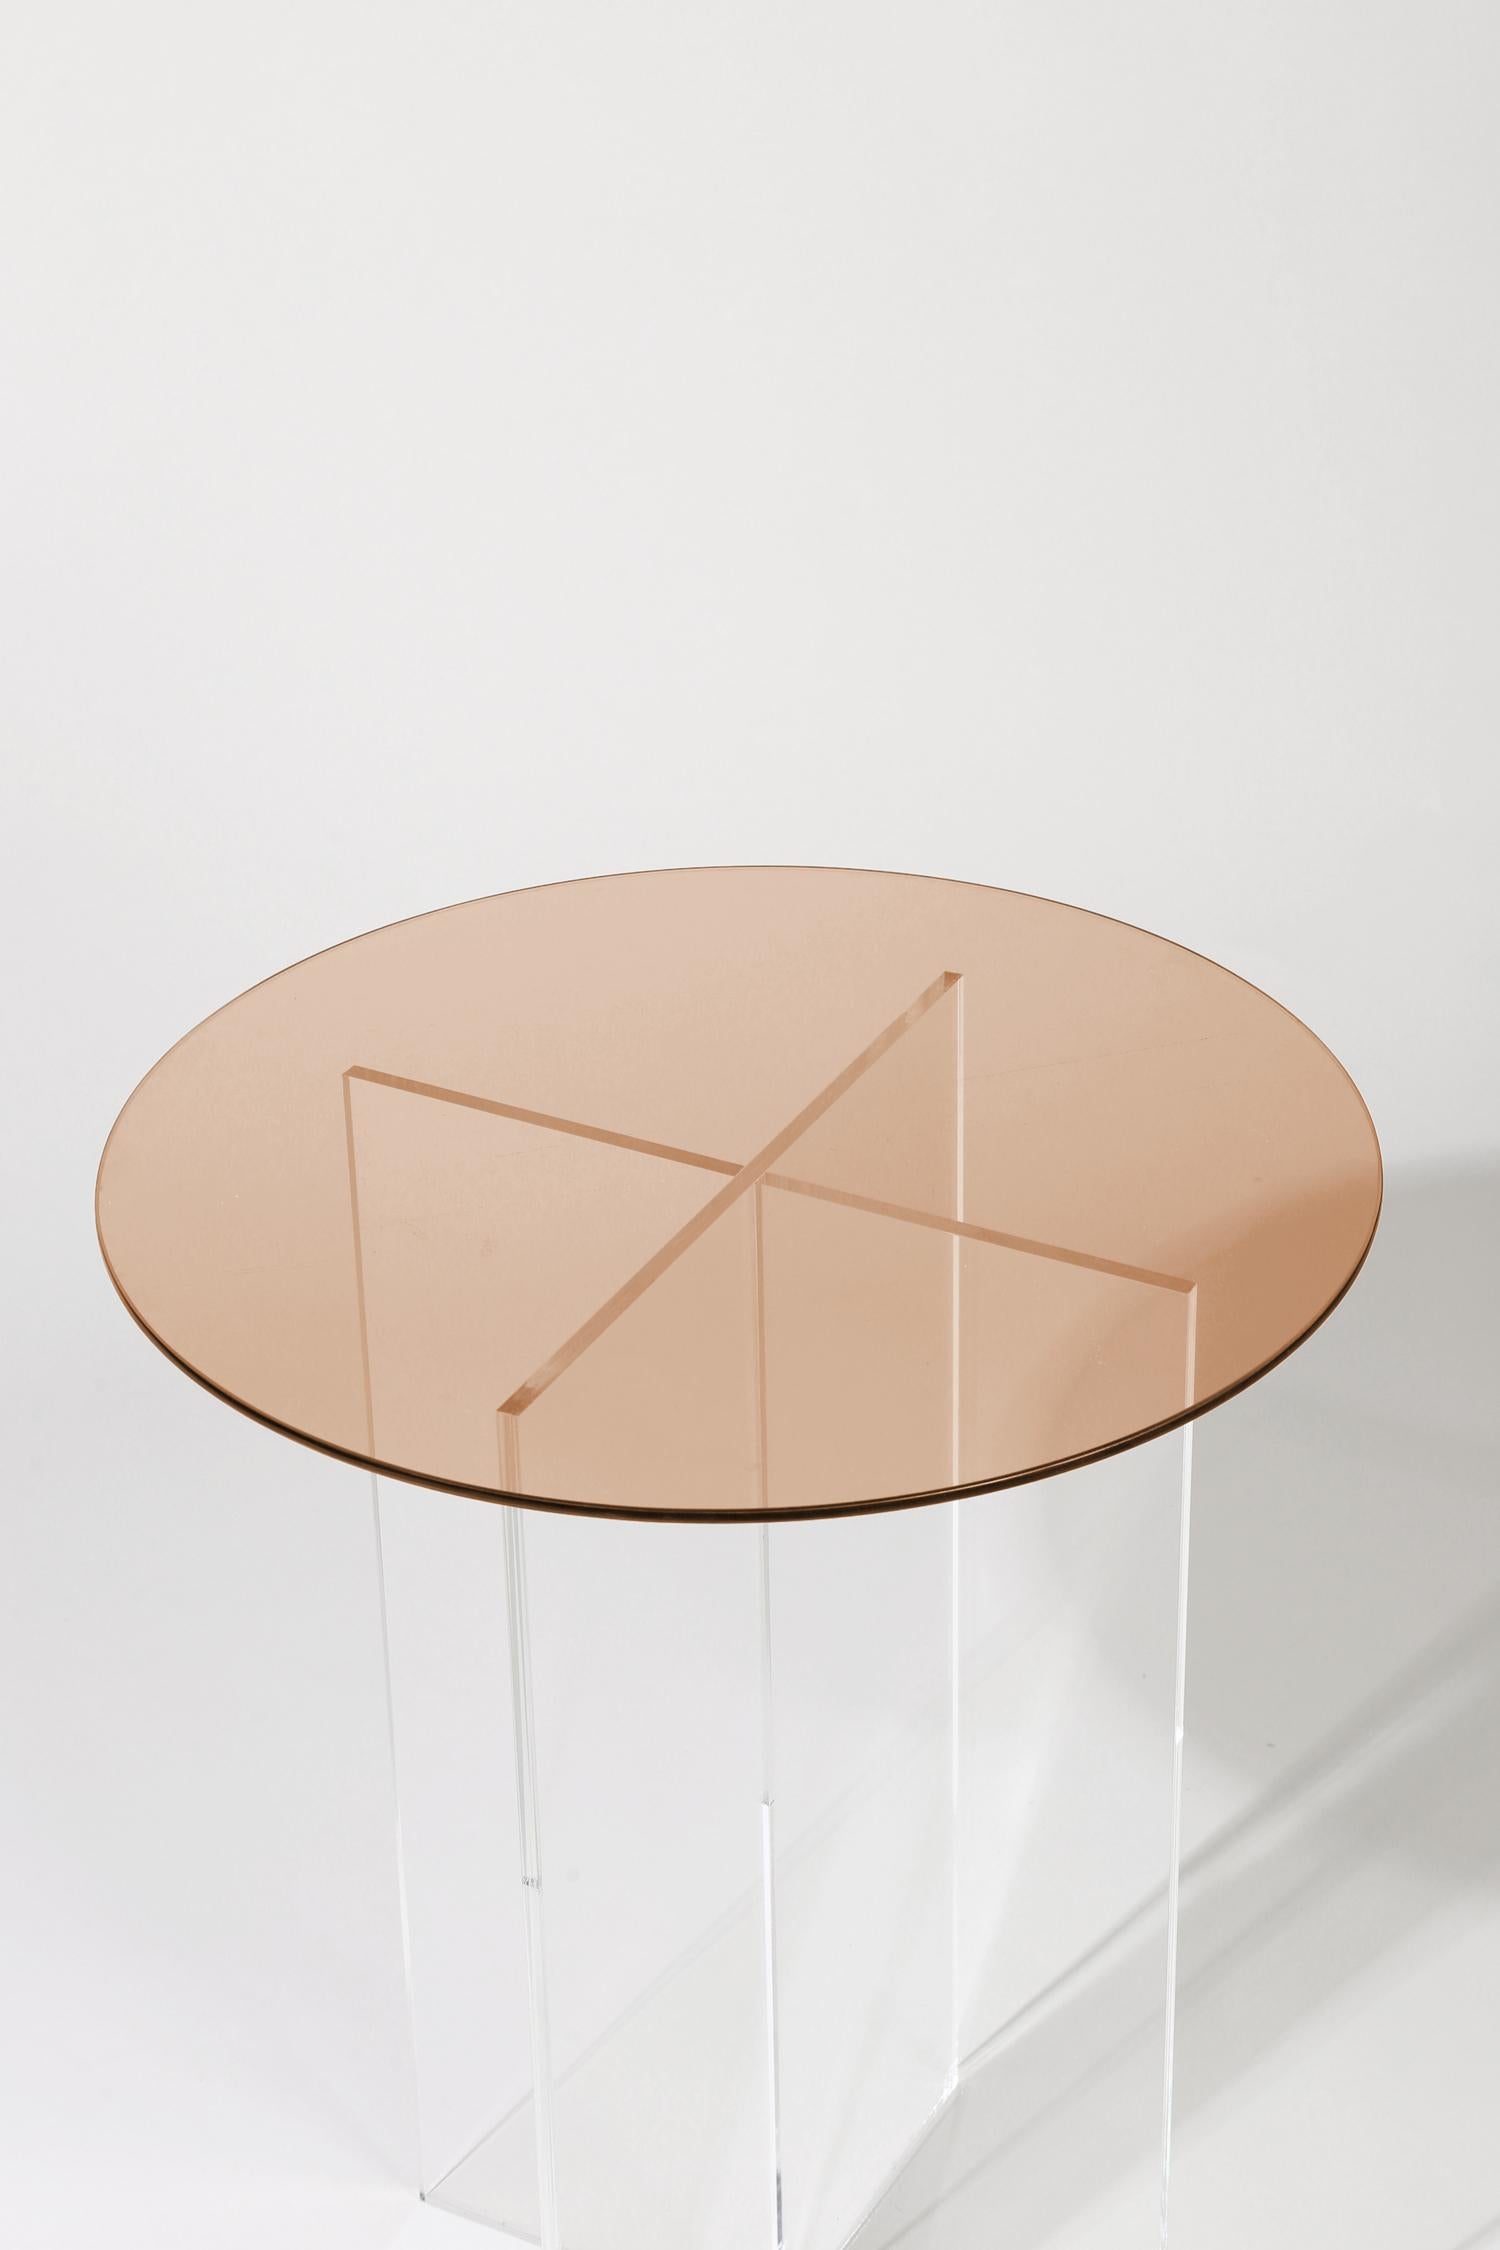 Made to order. Please allow 6 weeks for production.

The Section side table is designed with clear vertical structures that give the appearance of floating horizontal spans. The effect is subtle with all clear glass or can be accentuated with